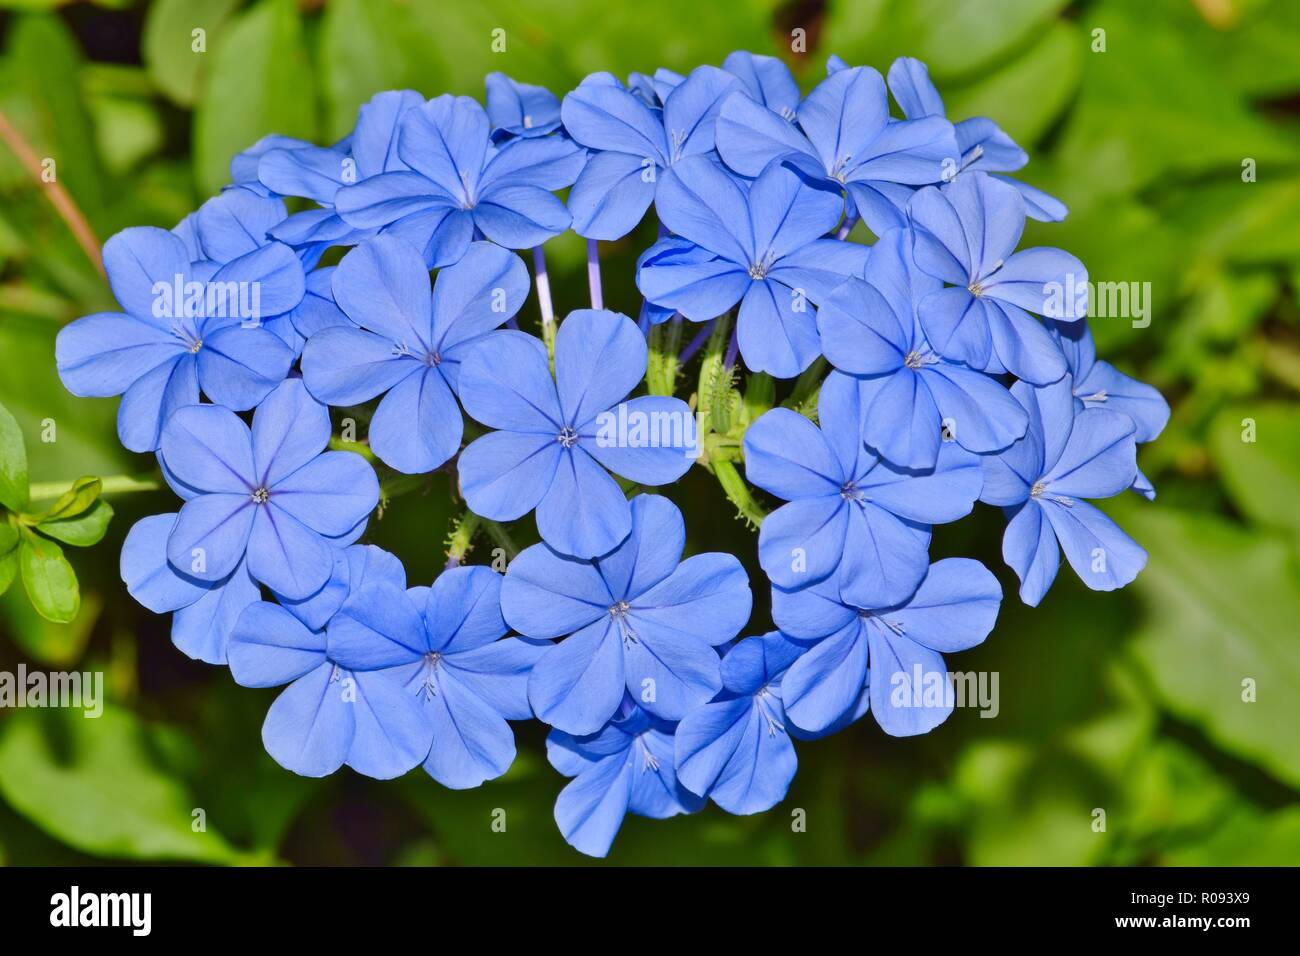 Blue Plumbago flowers (Plumbago auriculata) against a green background. These flowers are common in home gardens and they thrive in tropic climates. Stock Photo